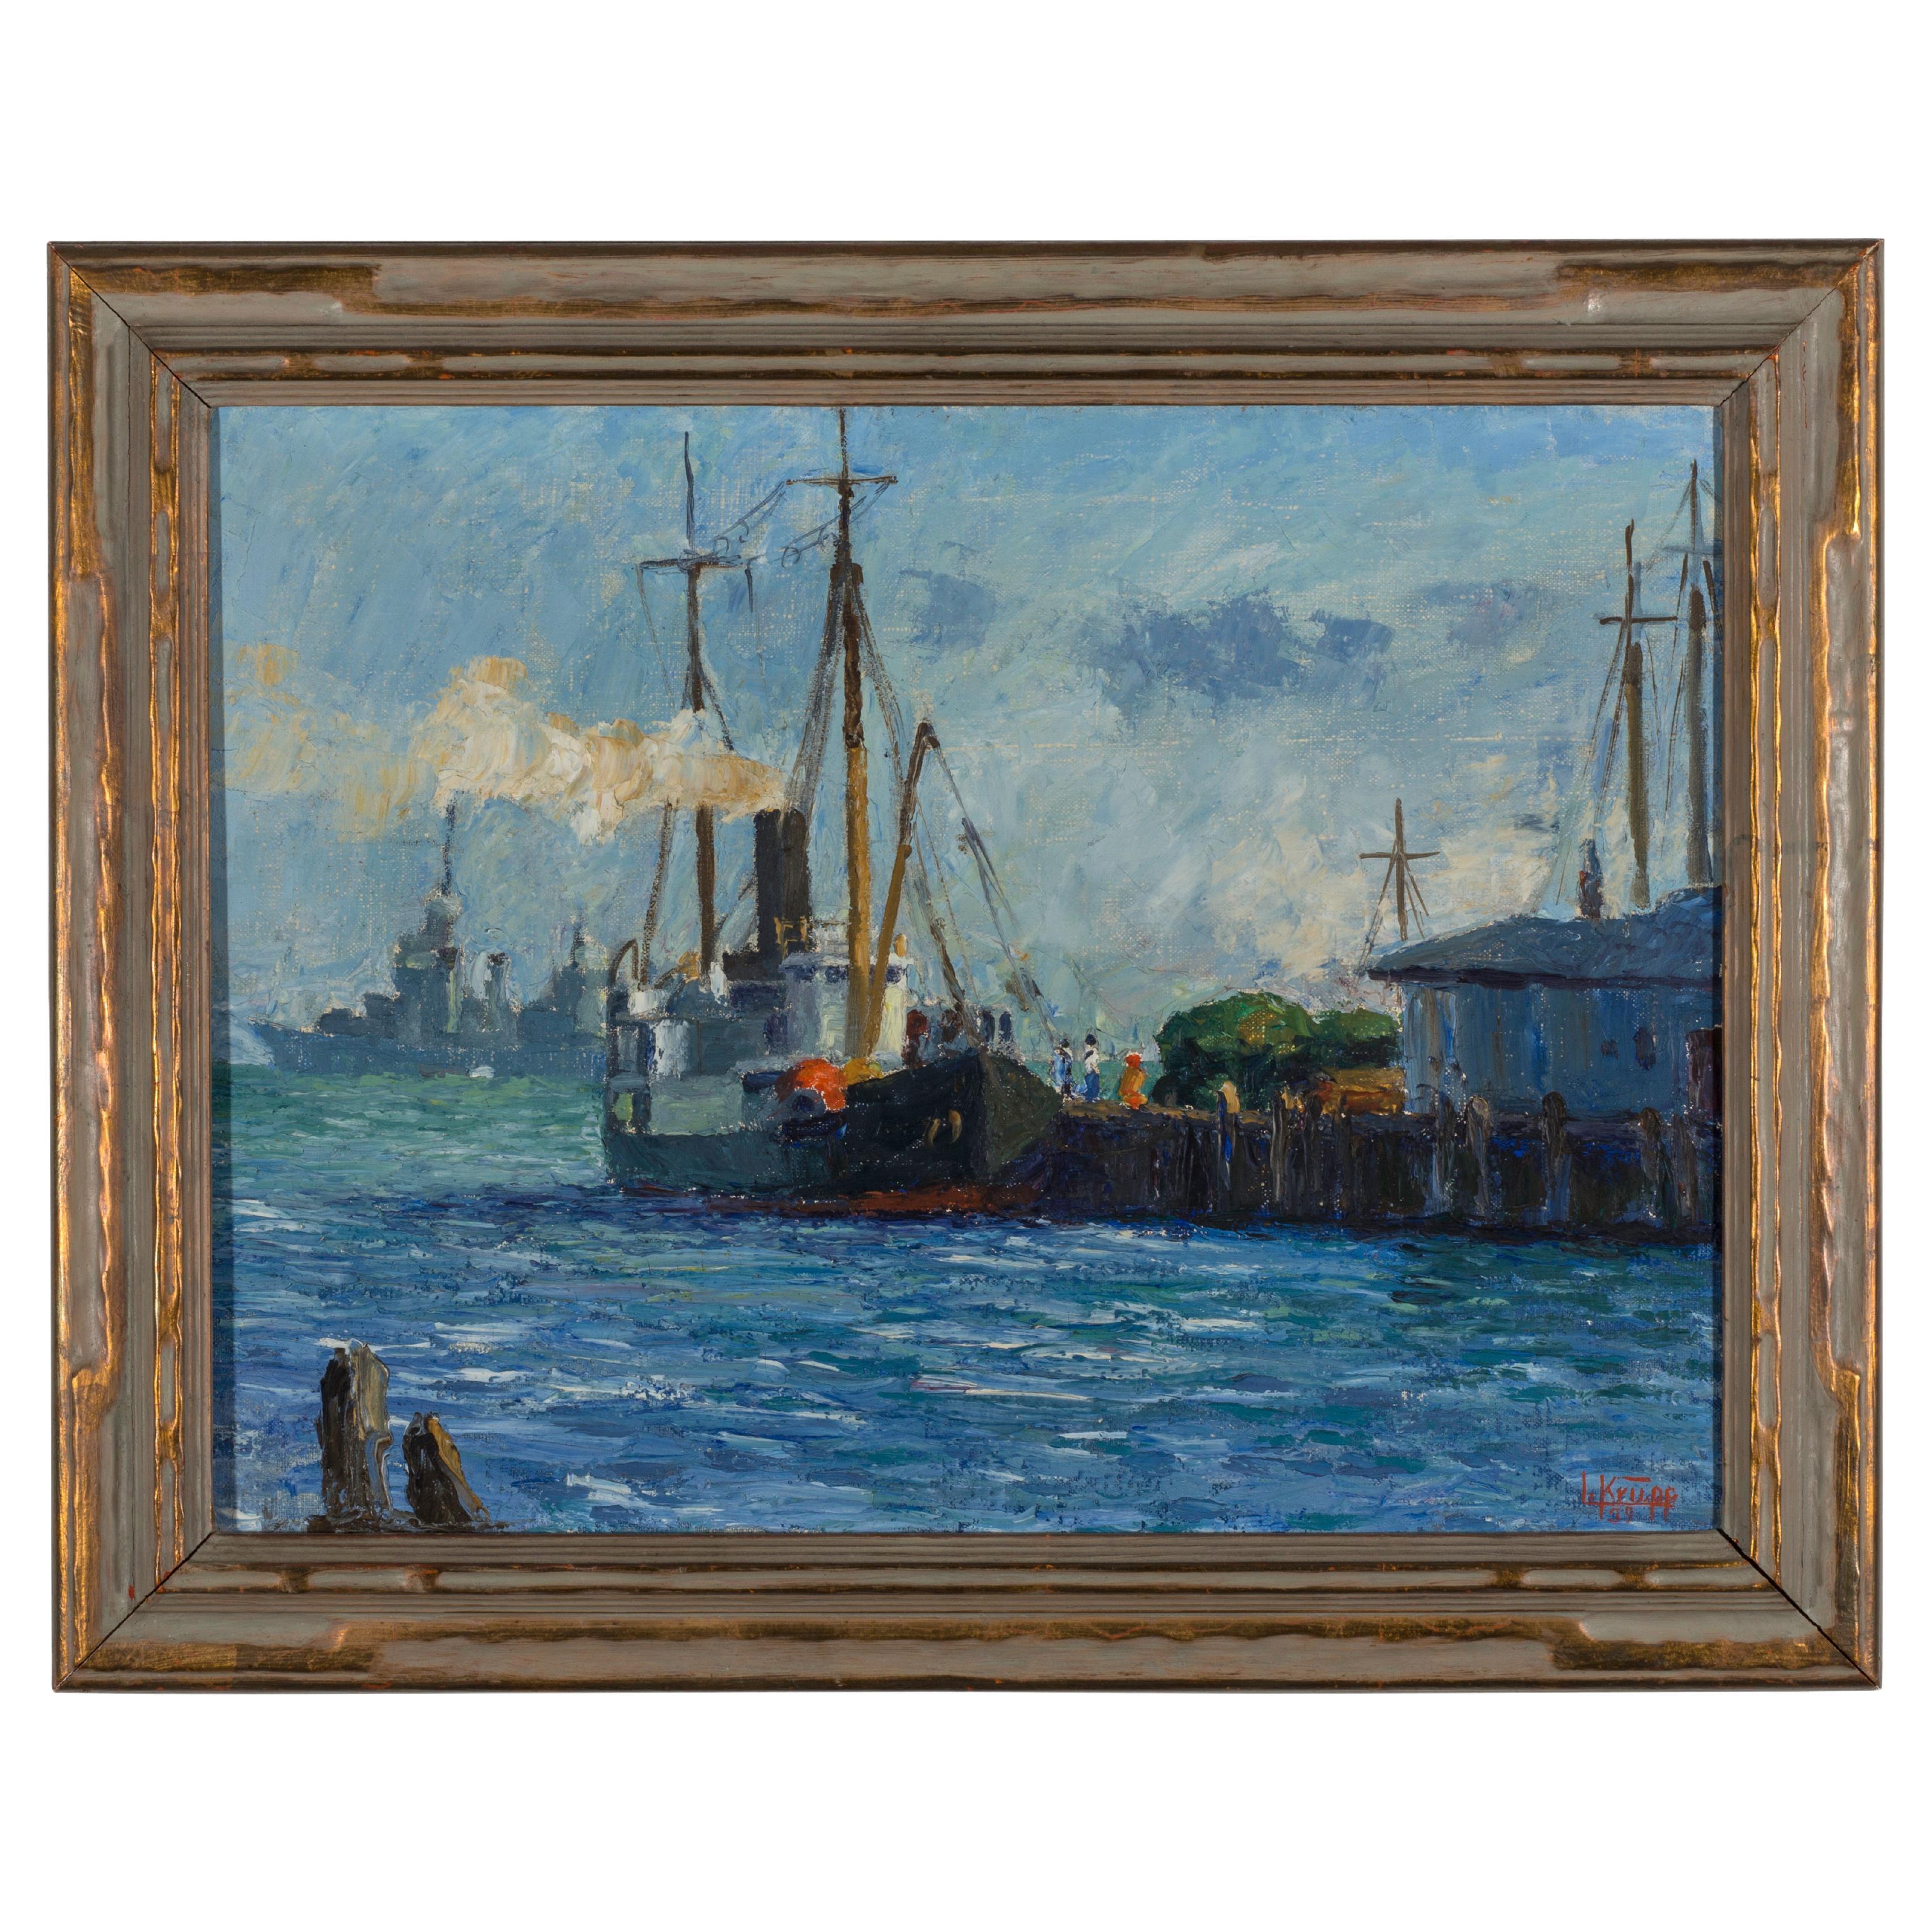 Painting by Louis Krupp “Harbor Ships” For Sale